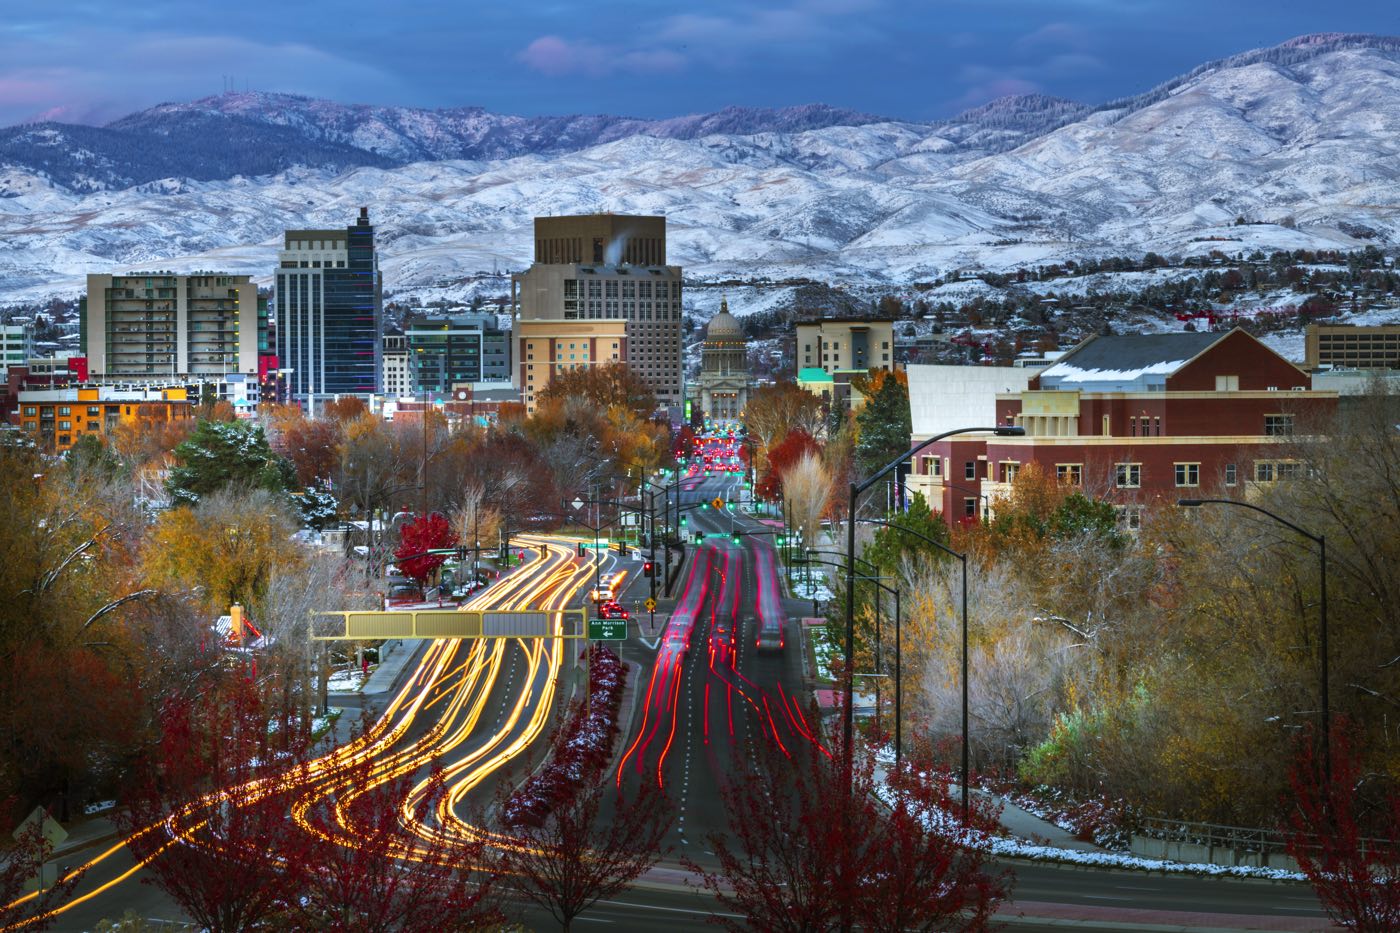 17 FANTASTIC THINGS TO DO IN BOISE, IDAHO